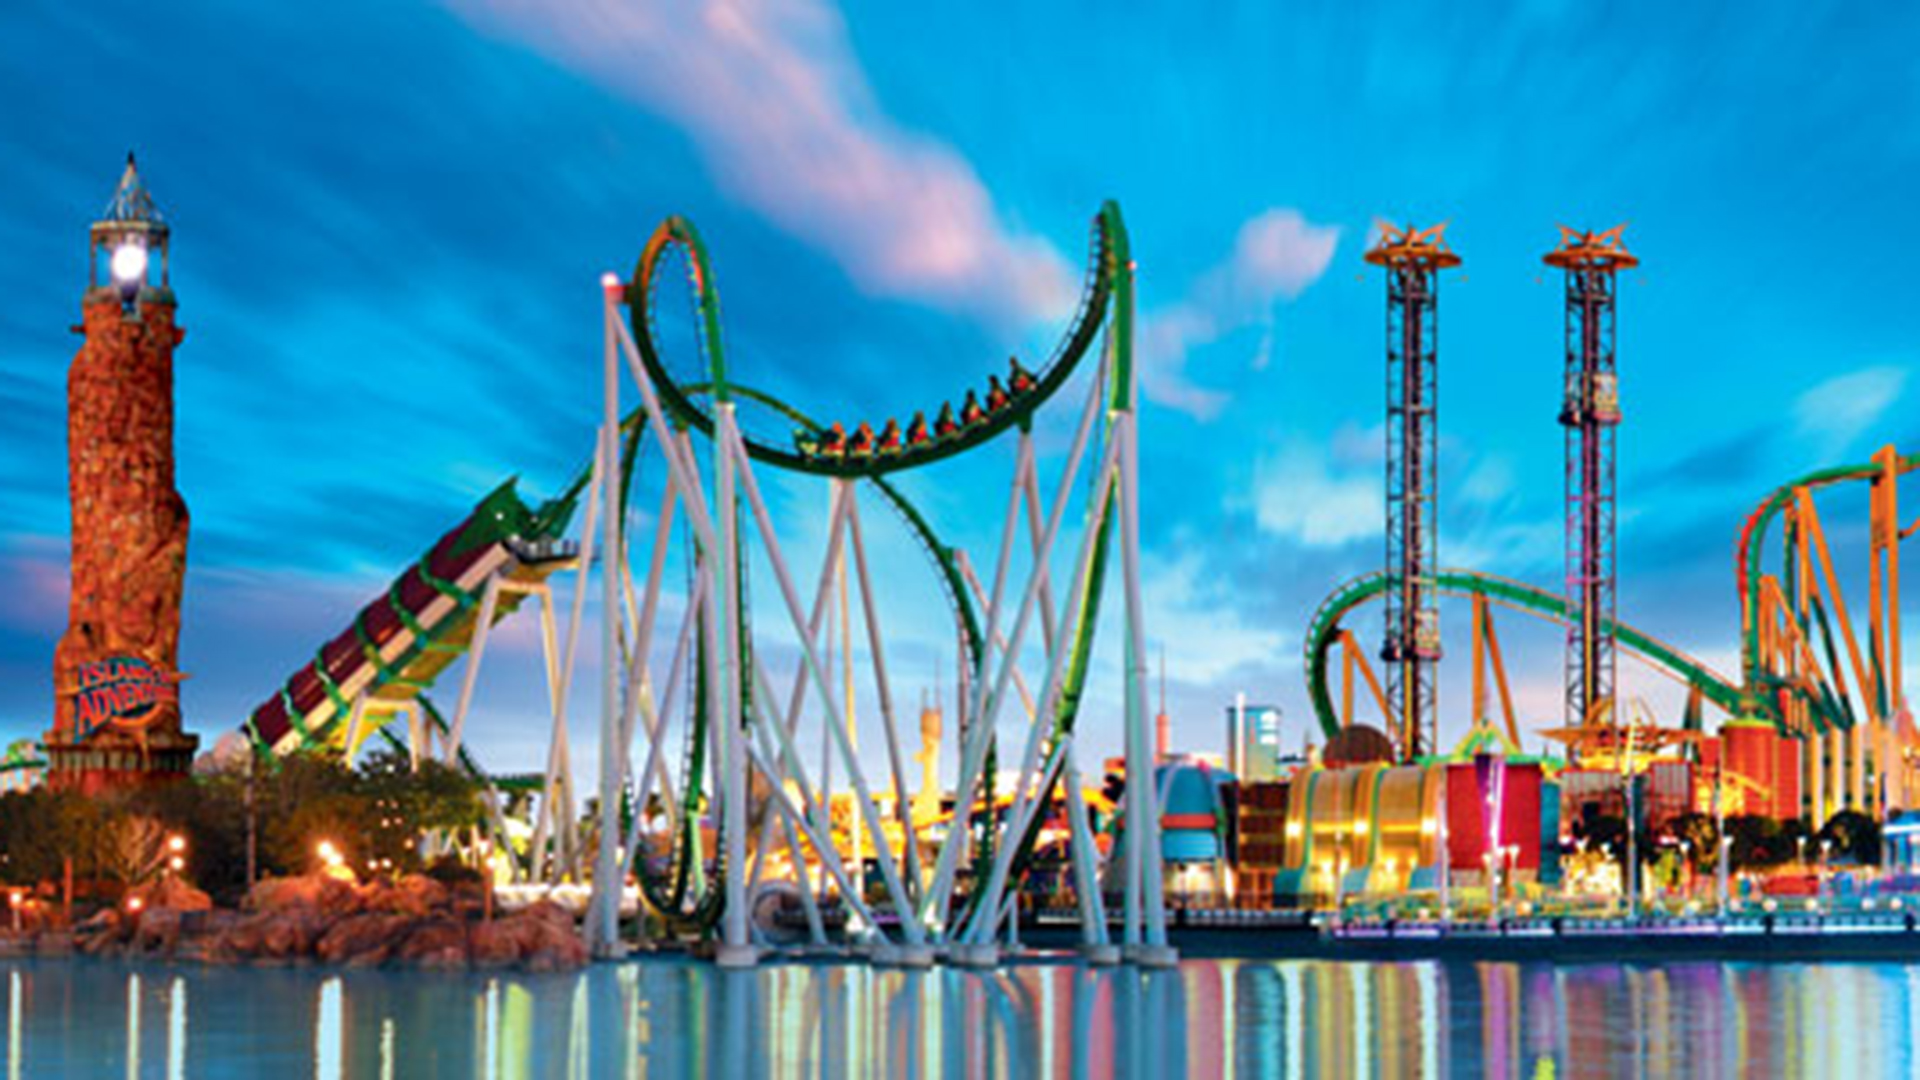 Top 10 largest amusement parks in America